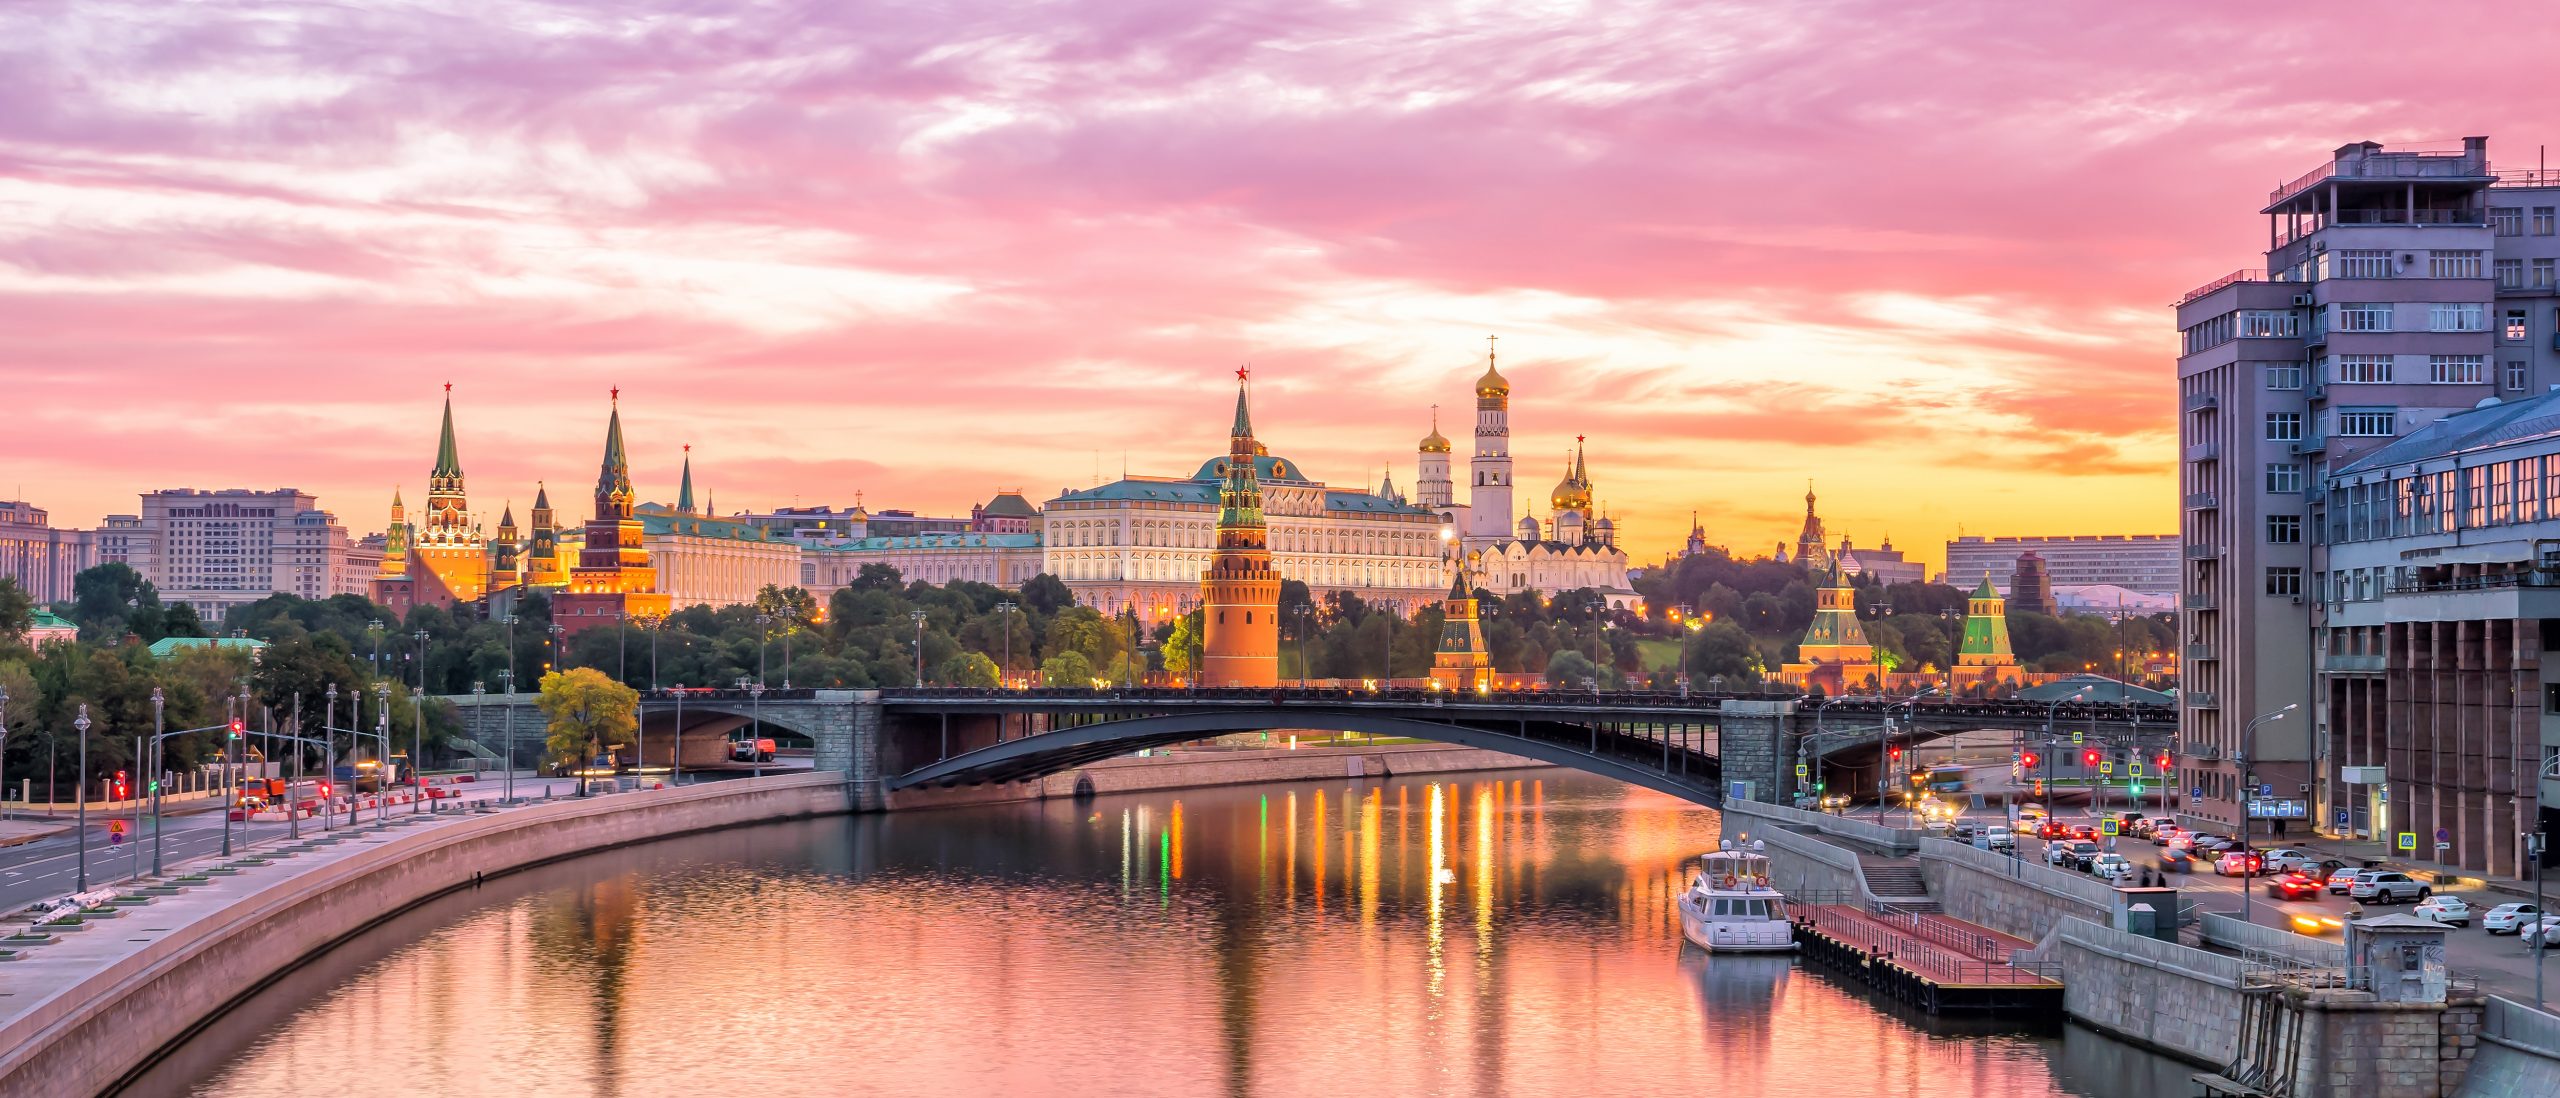 Moscow,Kremlin,And,River,In,Morning,,Russia